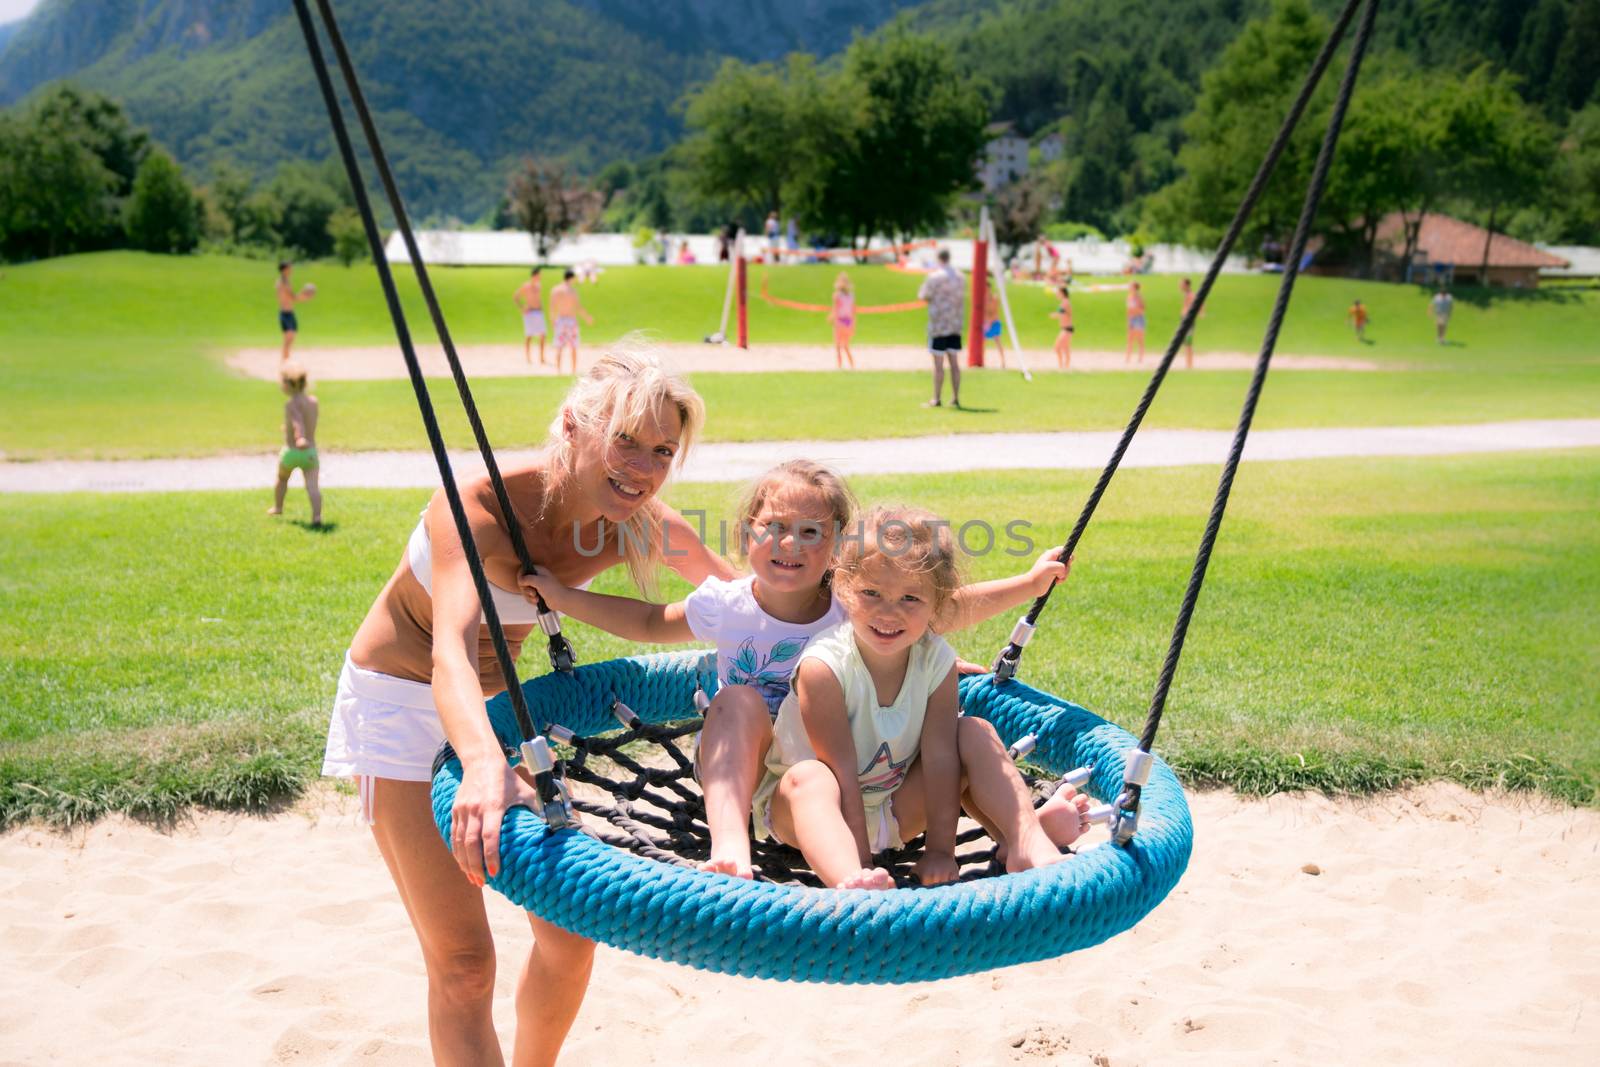 Blonde mom pushes the girls on the round rope swing in a playground.